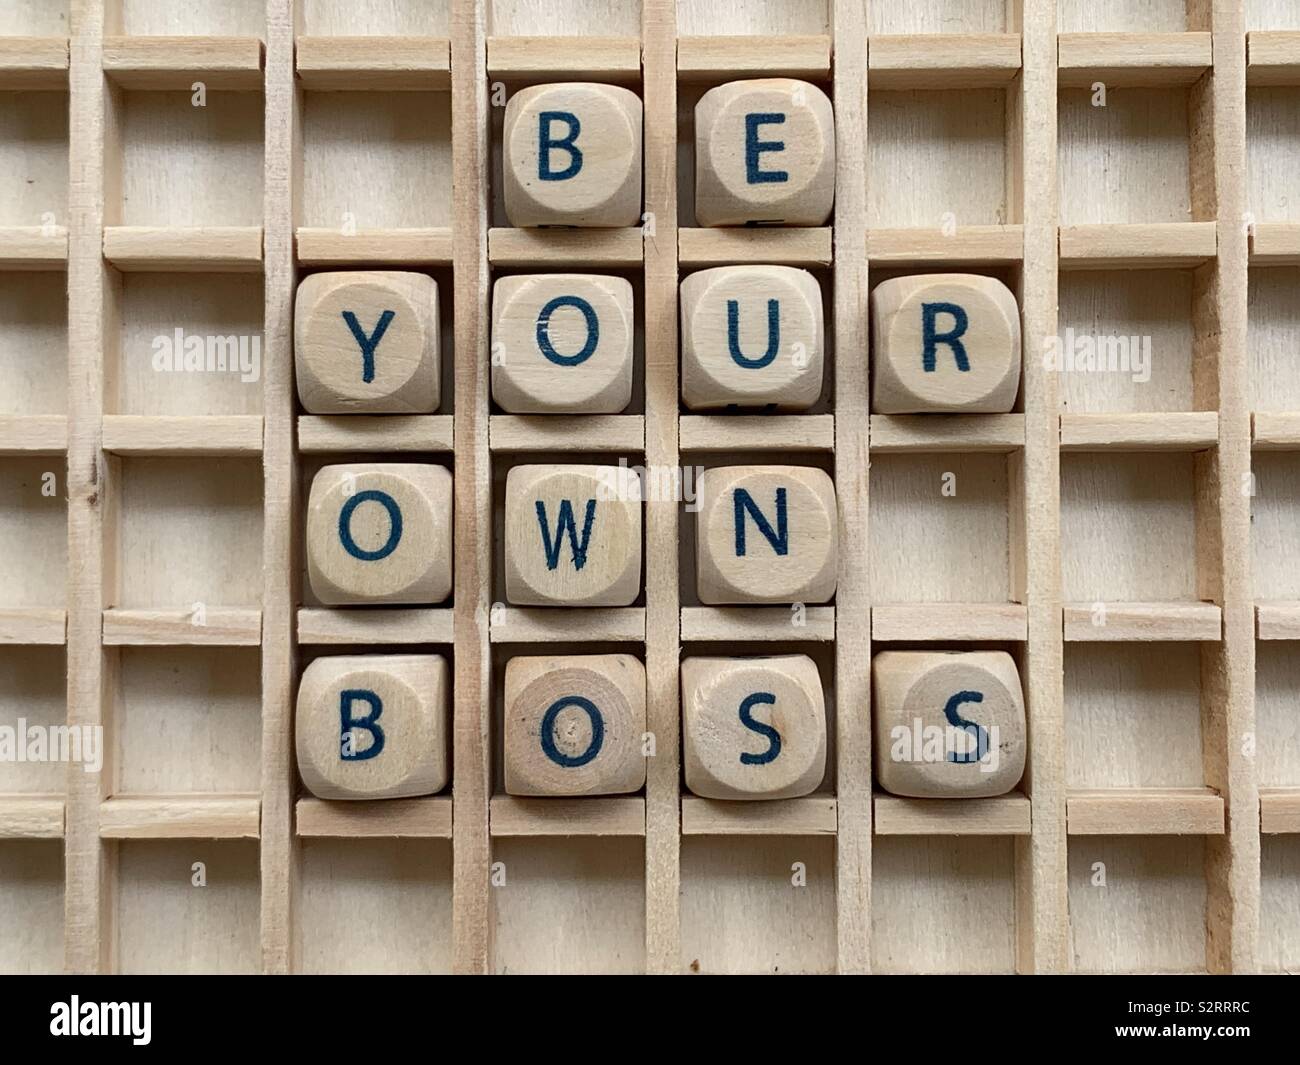 Be your own boss, motivational words composed with wooden cube dice letters Stock Photo